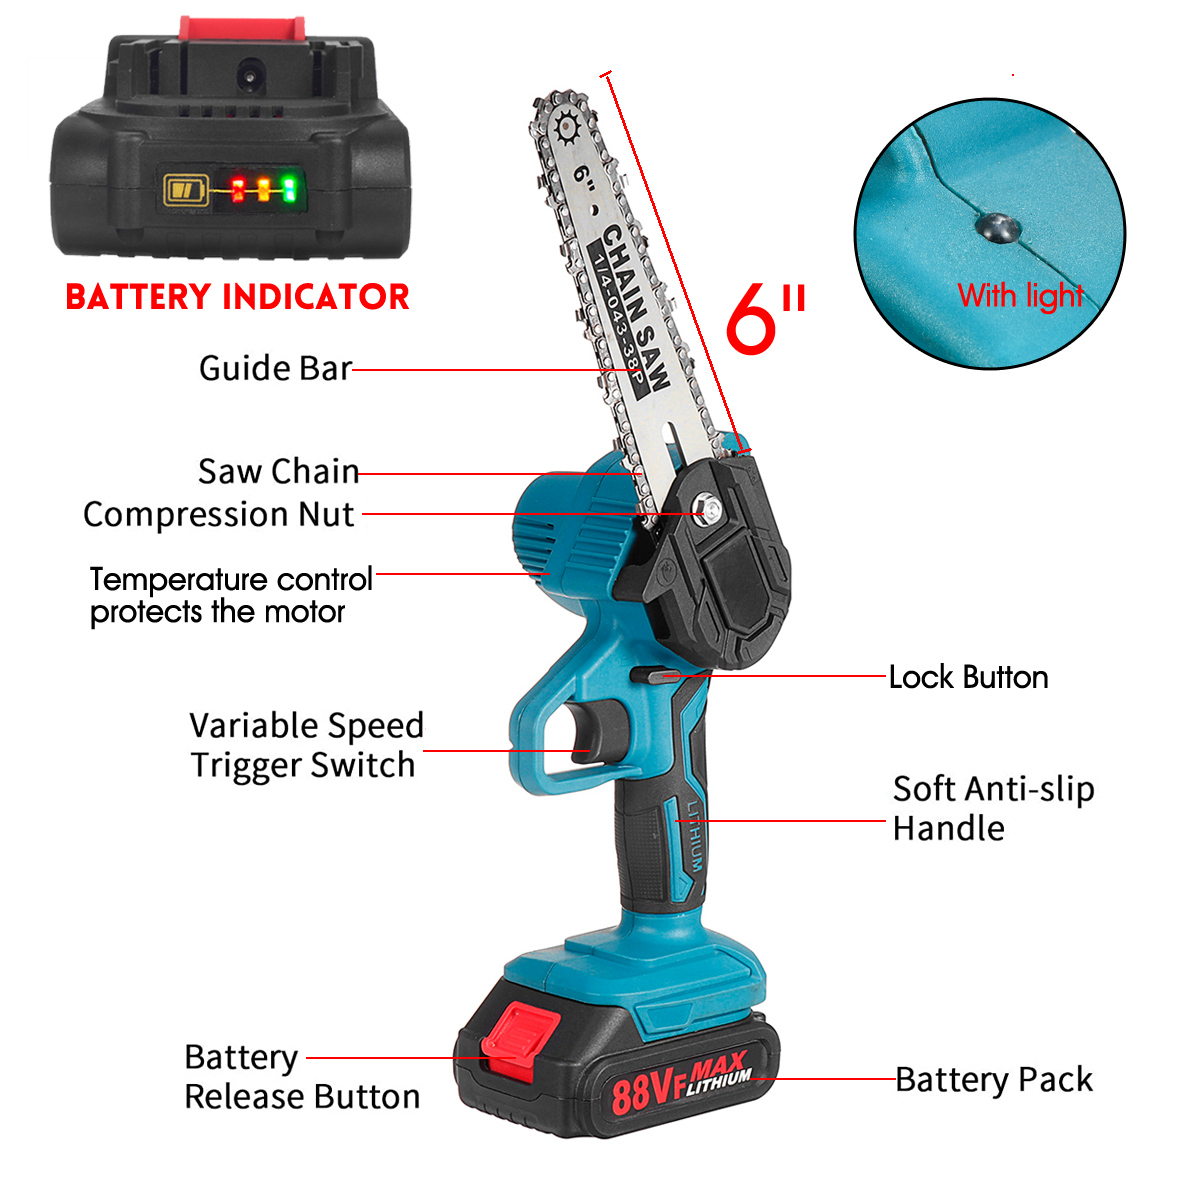 Drillpro-88VF-7500mAh-6in-Cordless-Electric-Chain-Saw-Battery-Indicator-Wood-Cutter-One-Hand-Saw-Woo-1868437-16